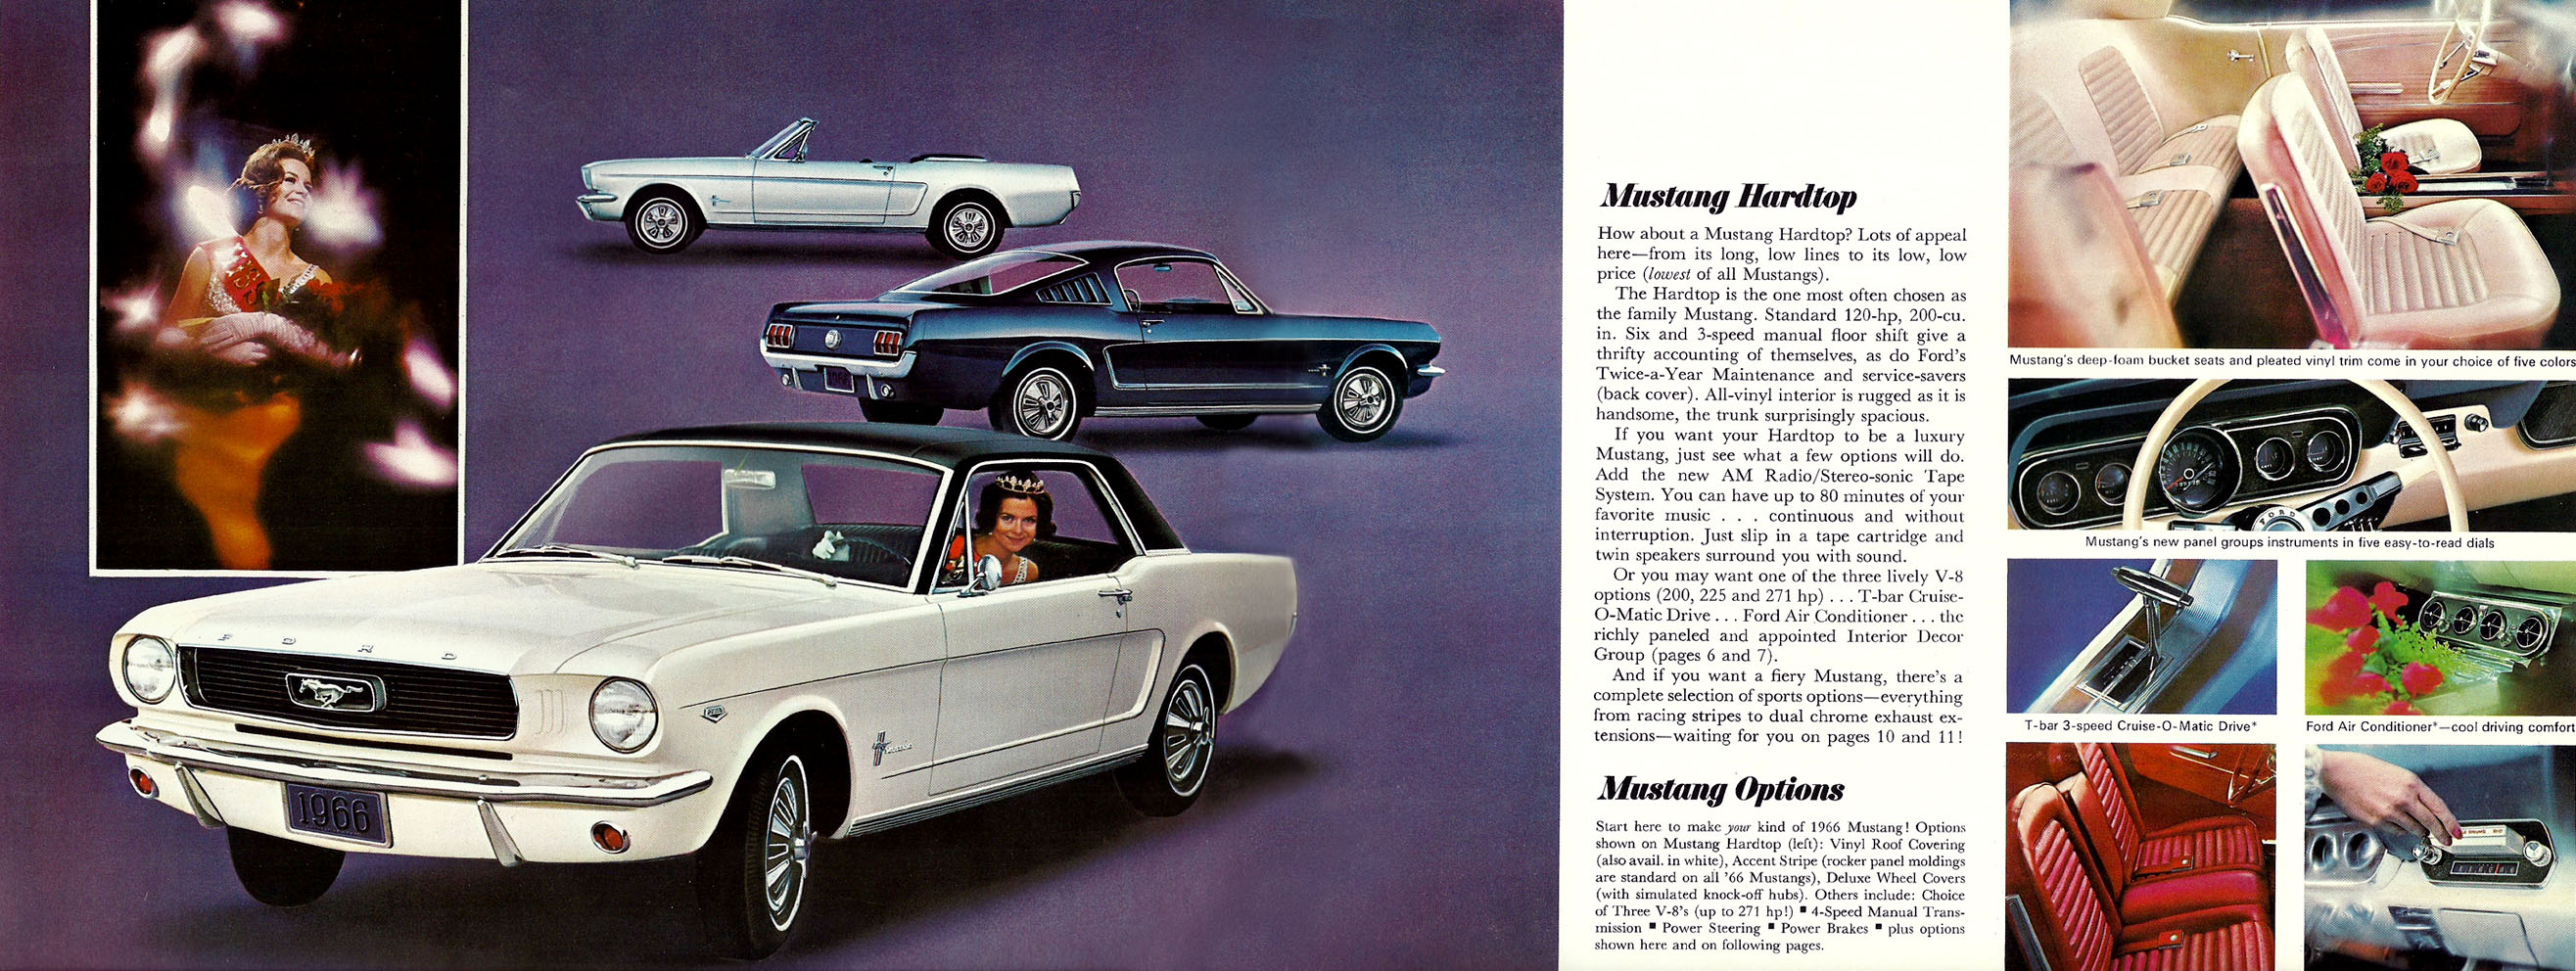 1966 Ford Mustang-04-05